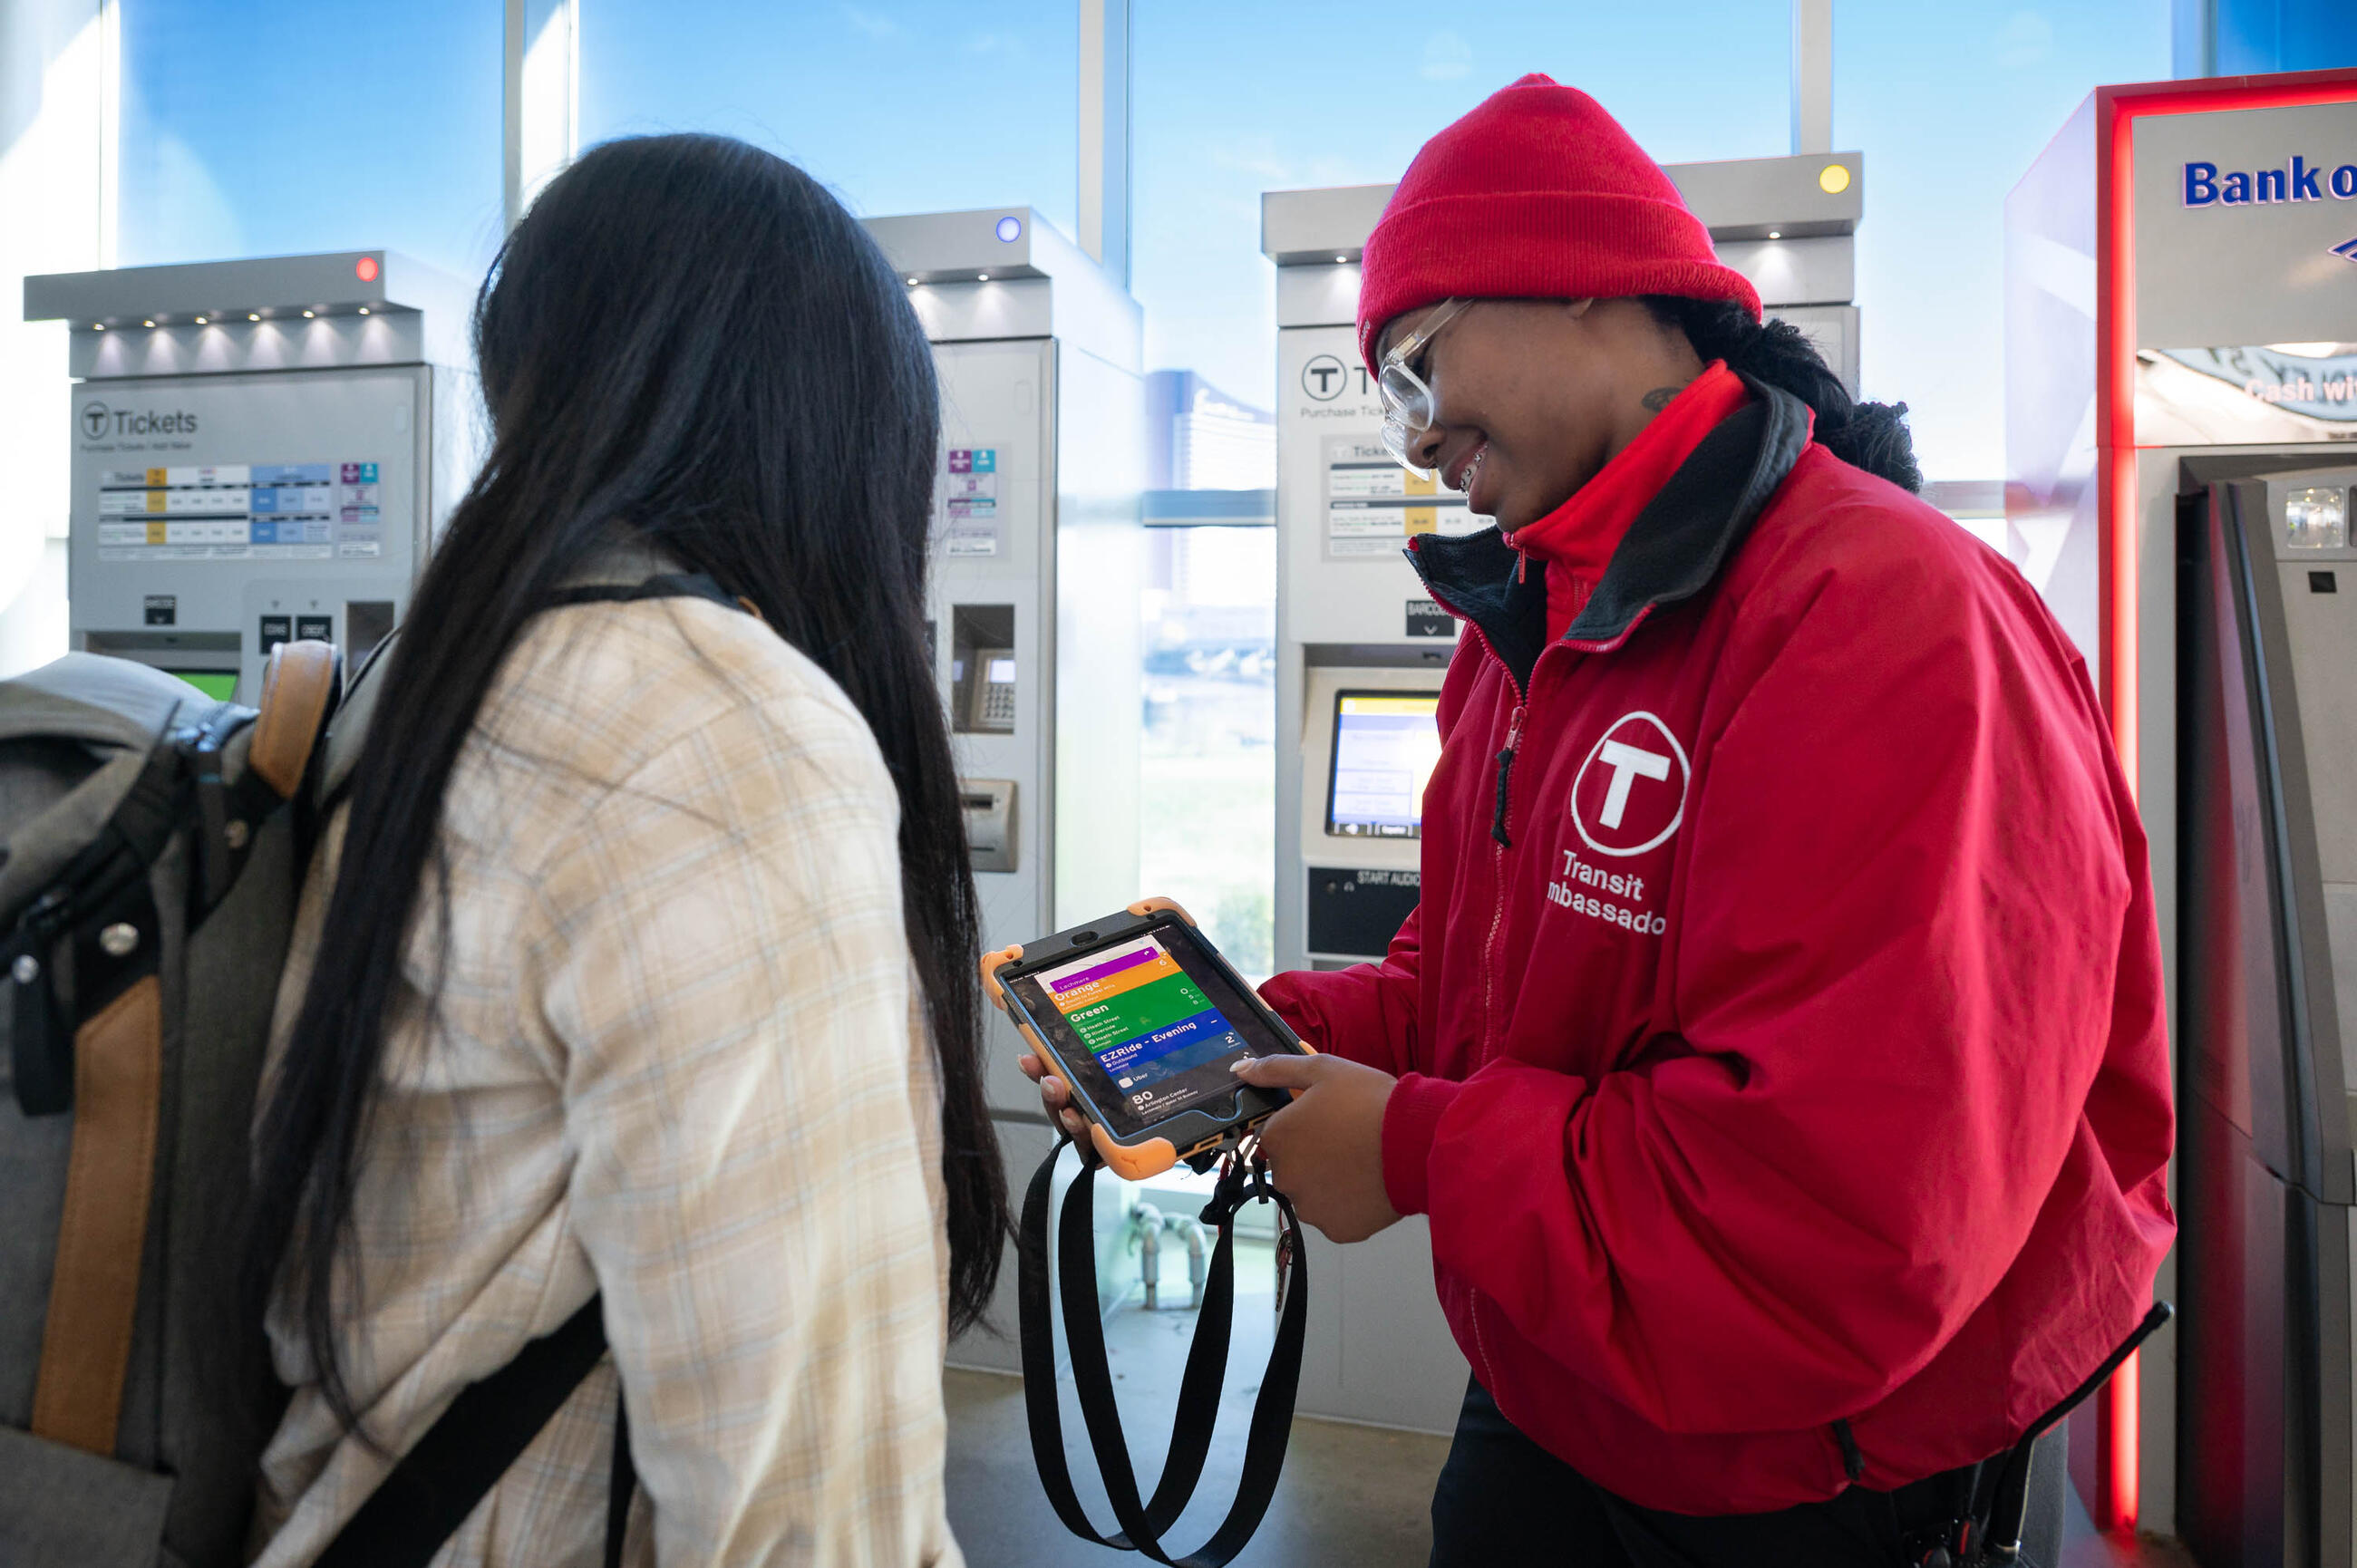 Transit Ambassador in red jacket using a tablet to help a rider